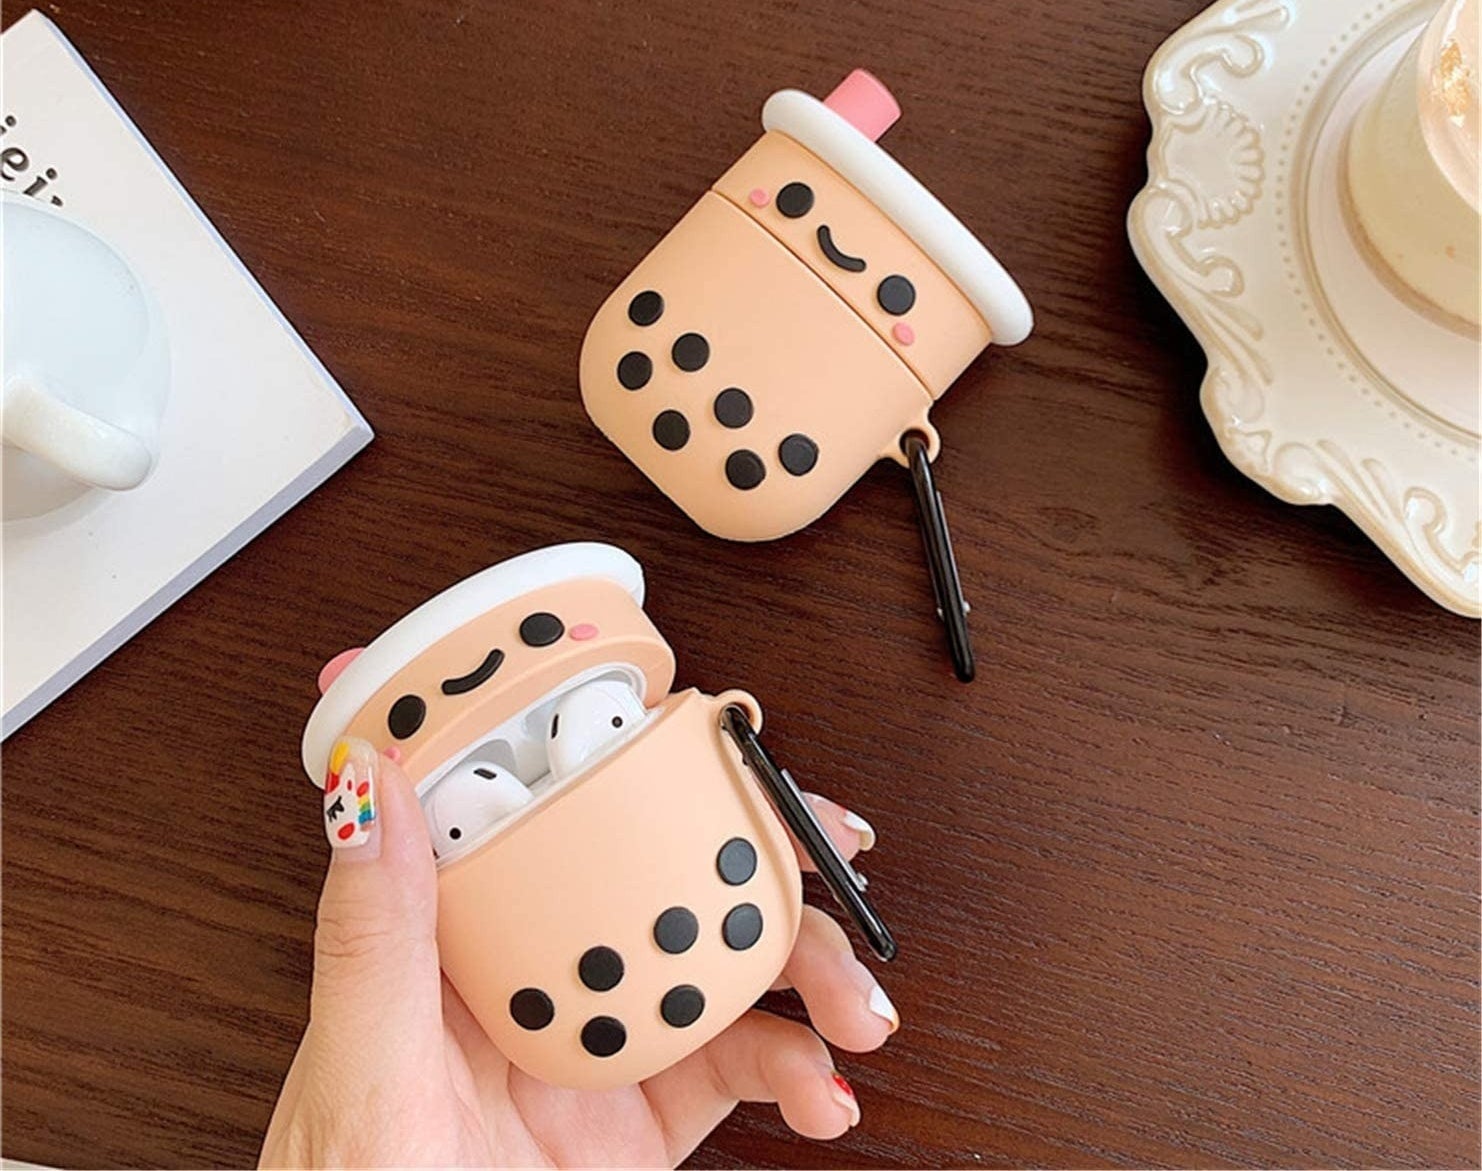 hand holding white AirPods stashed in cute Boba-shaped AirPods case